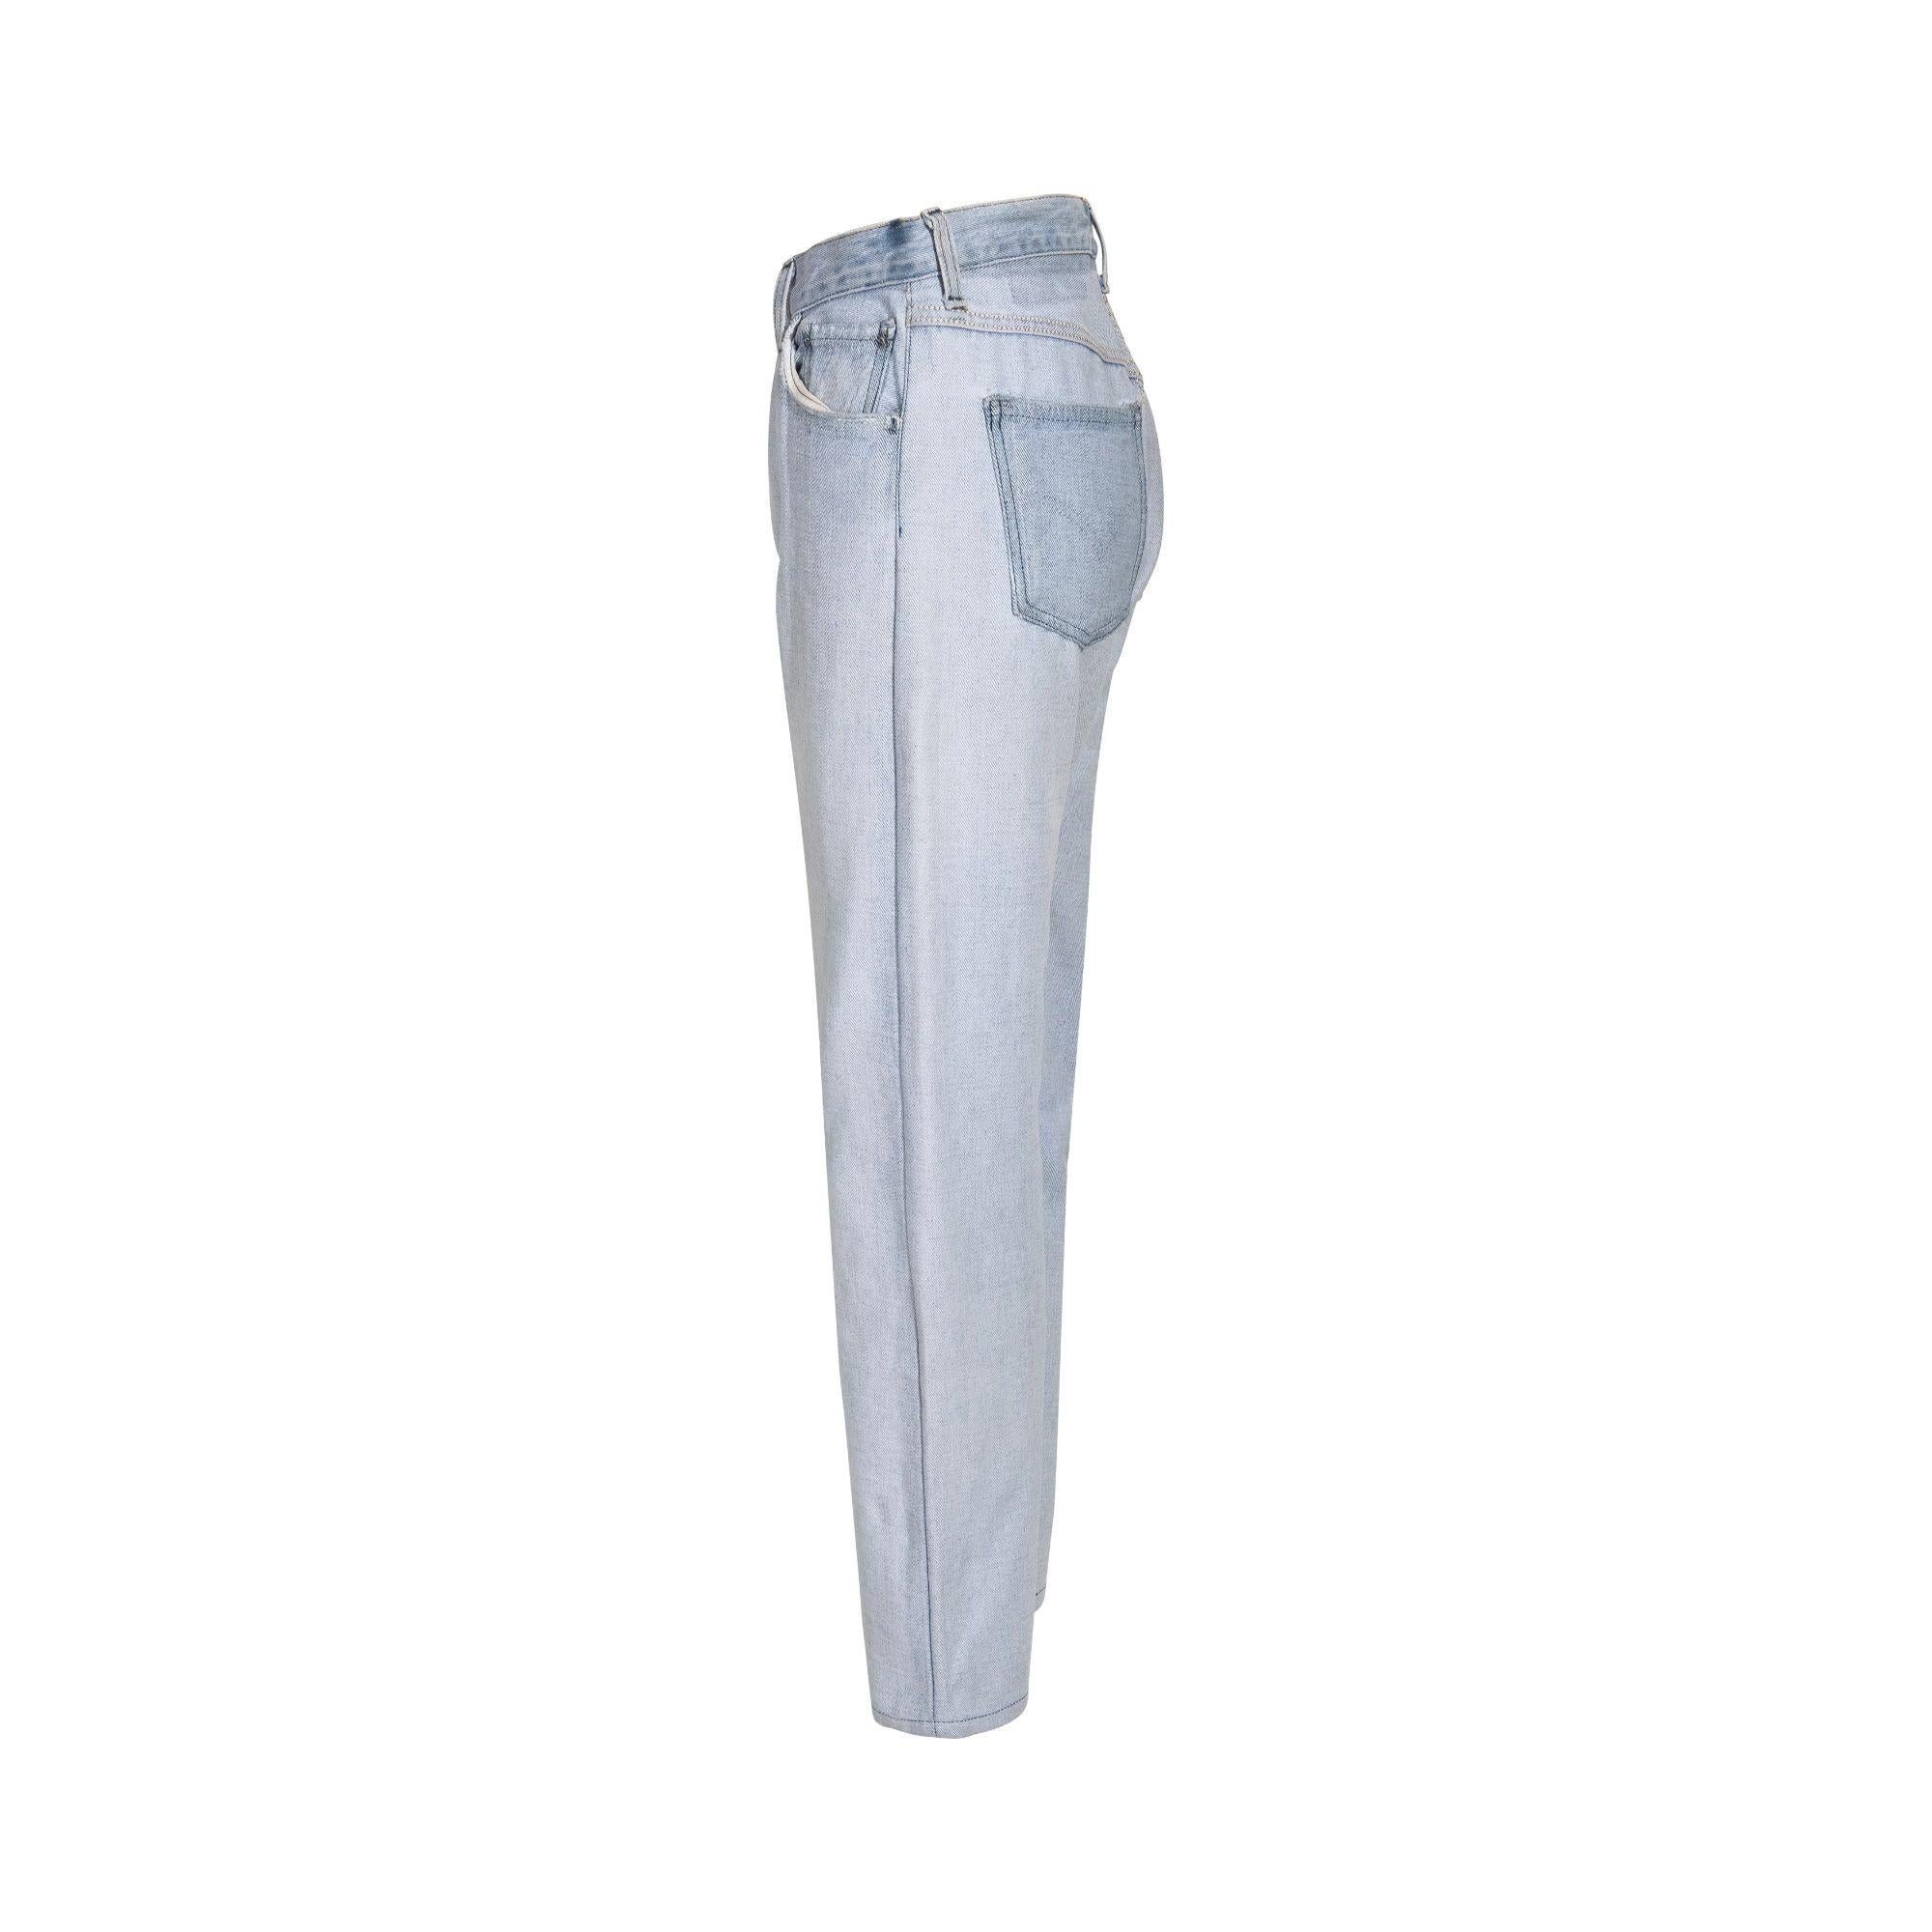 A/W 2003 Maison Martin Margiela Artisanal Inverted Jeans In Excellent Condition For Sale In North Hollywood, CA